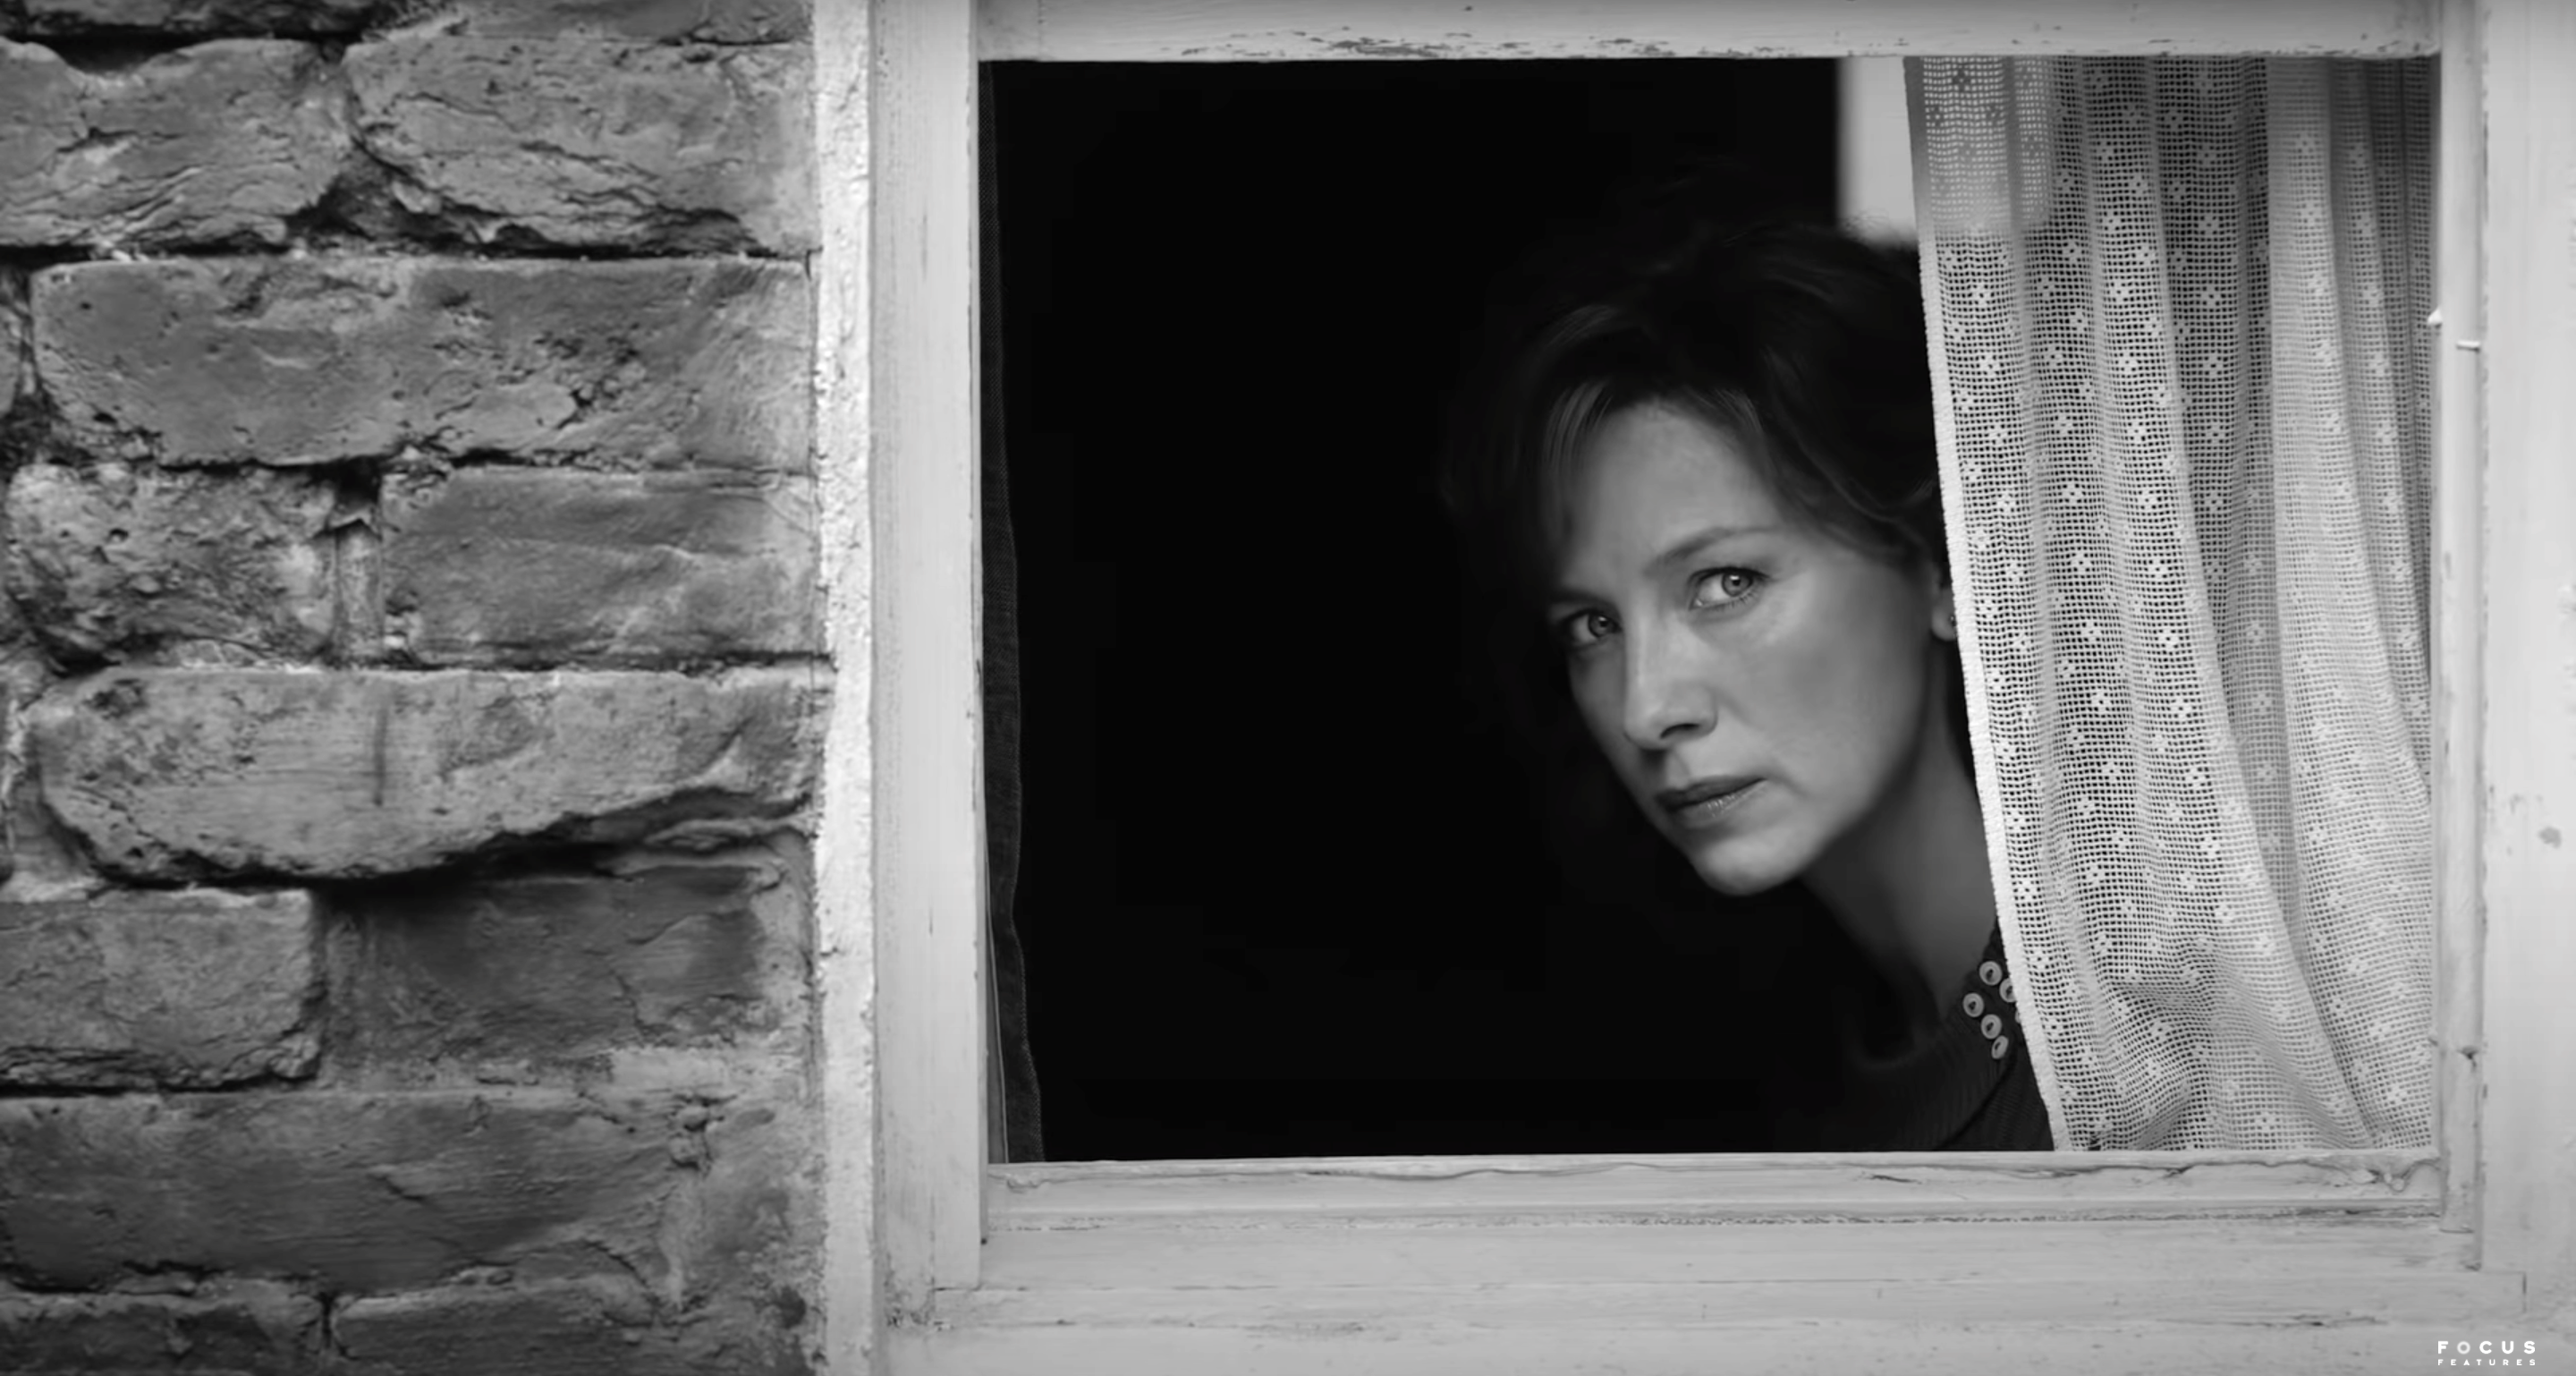 A woman peeks from behind a window in a black and white still image.